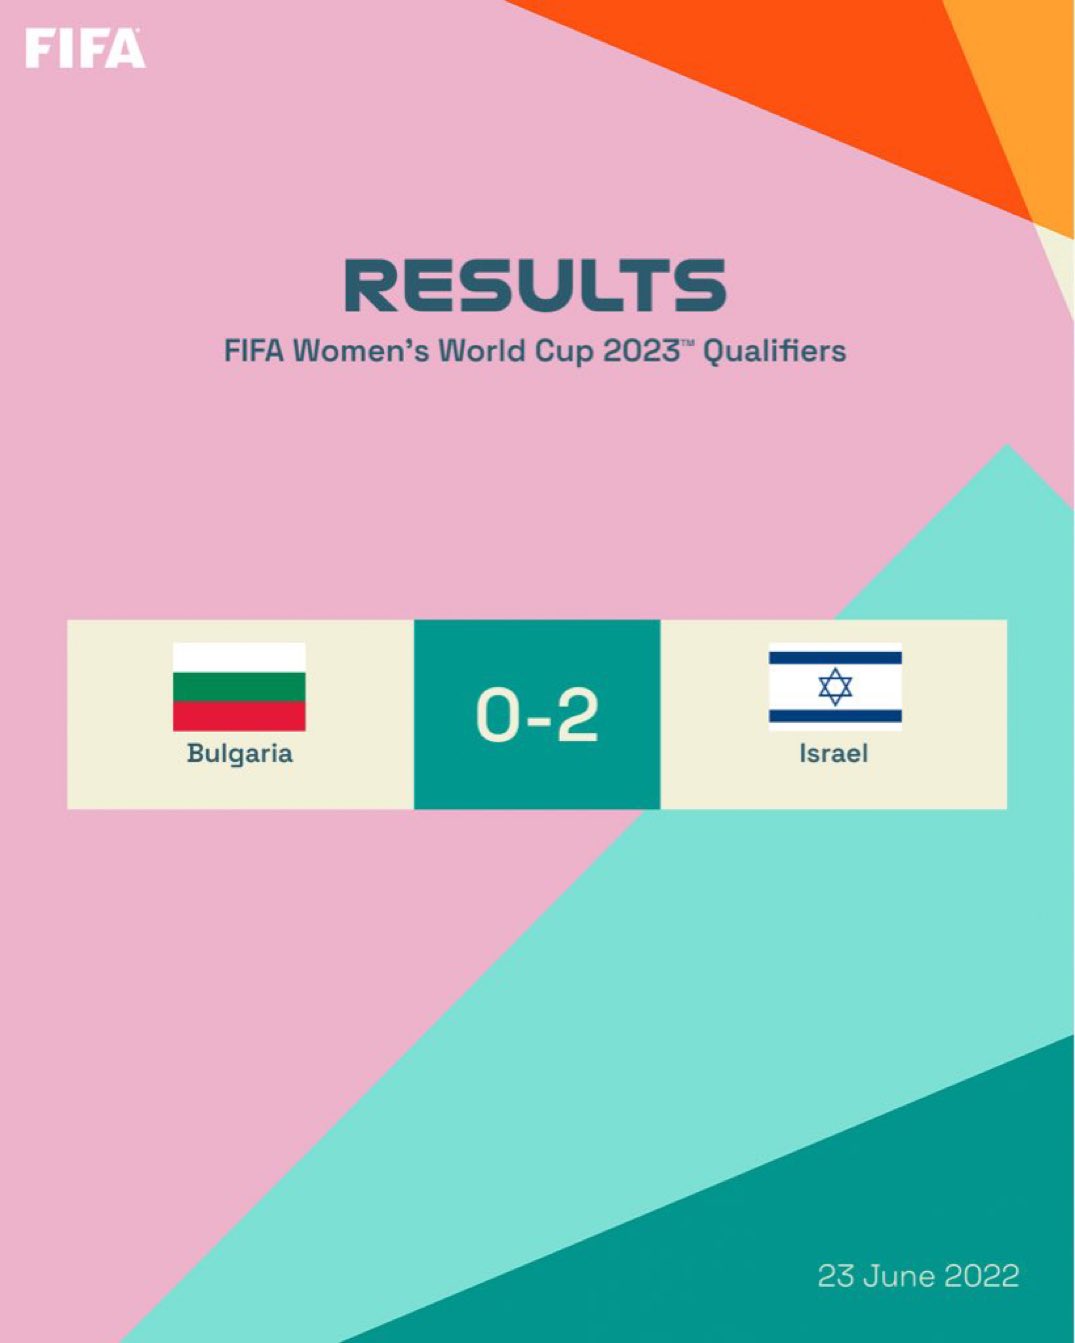 Fifa Women S World Cup Goals From Selimhodzic Amp Avital Help Israel Get The Best Of Bulgaria In Today S Europe Fifawwc Qualifier T Co Kmr85kg2bt Twitter